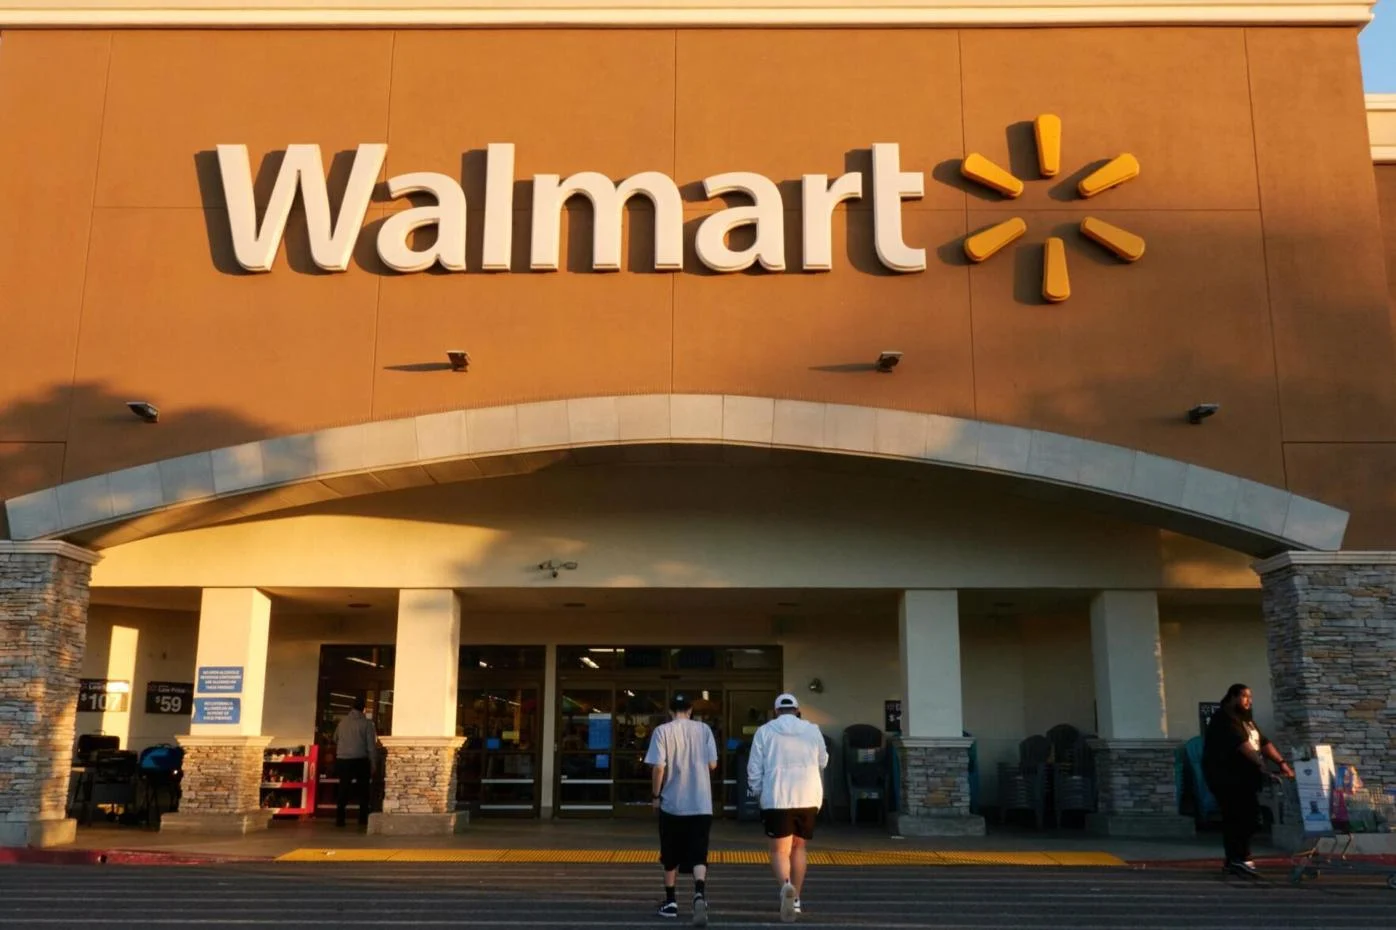 Sign of Inflation is Easing: Walmart is Slashing Prices on Clothing and Other Products to Compete with Amazon